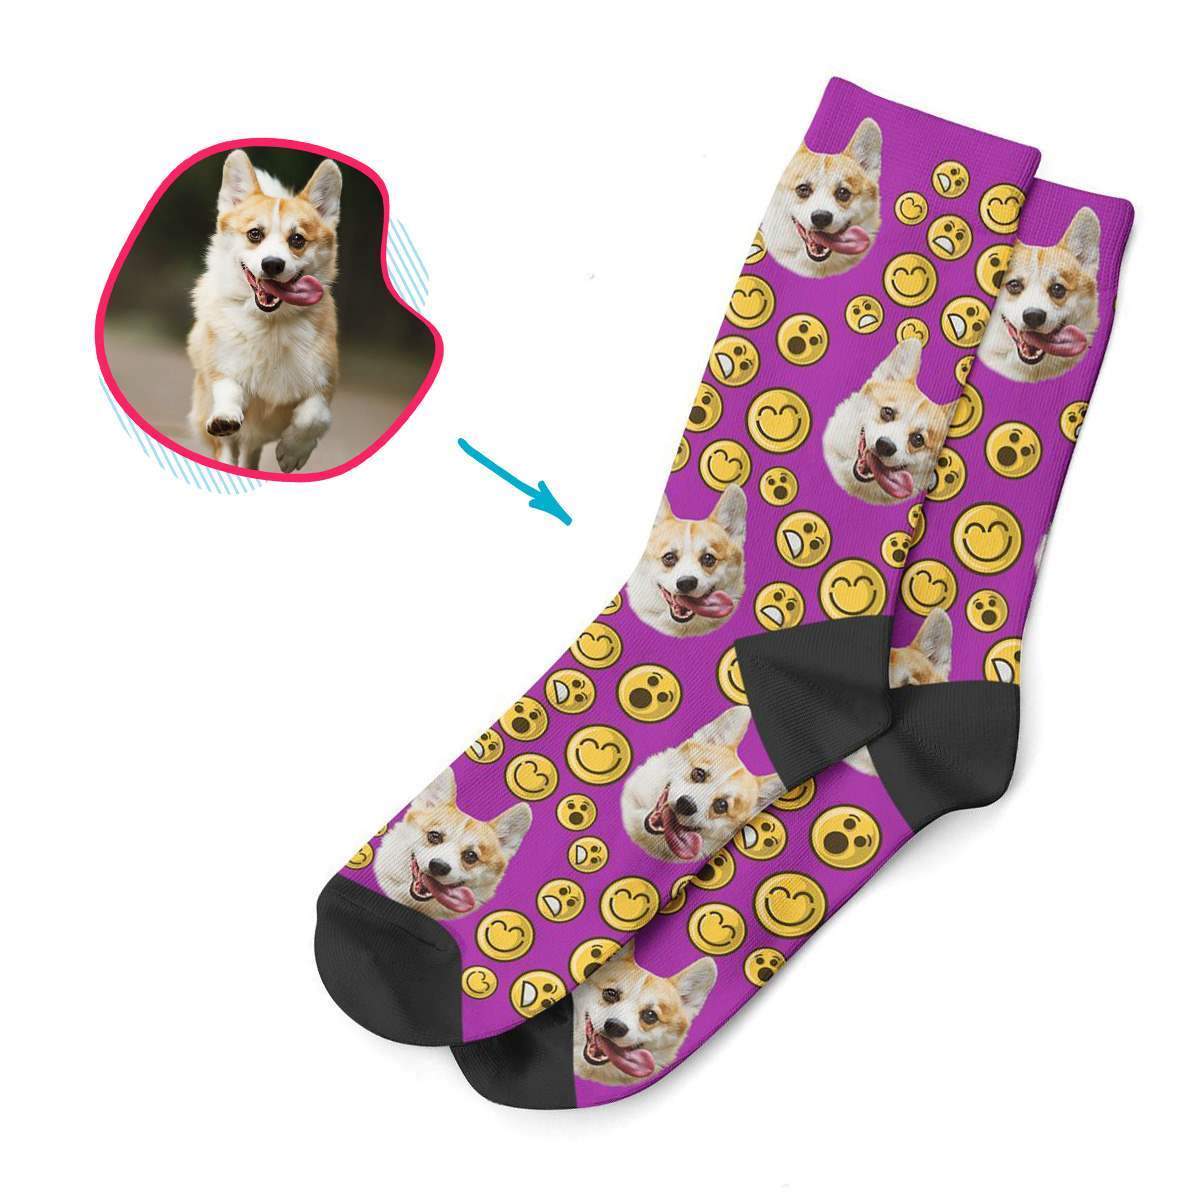 purple Smiles socks personalized with photo of face printed on them